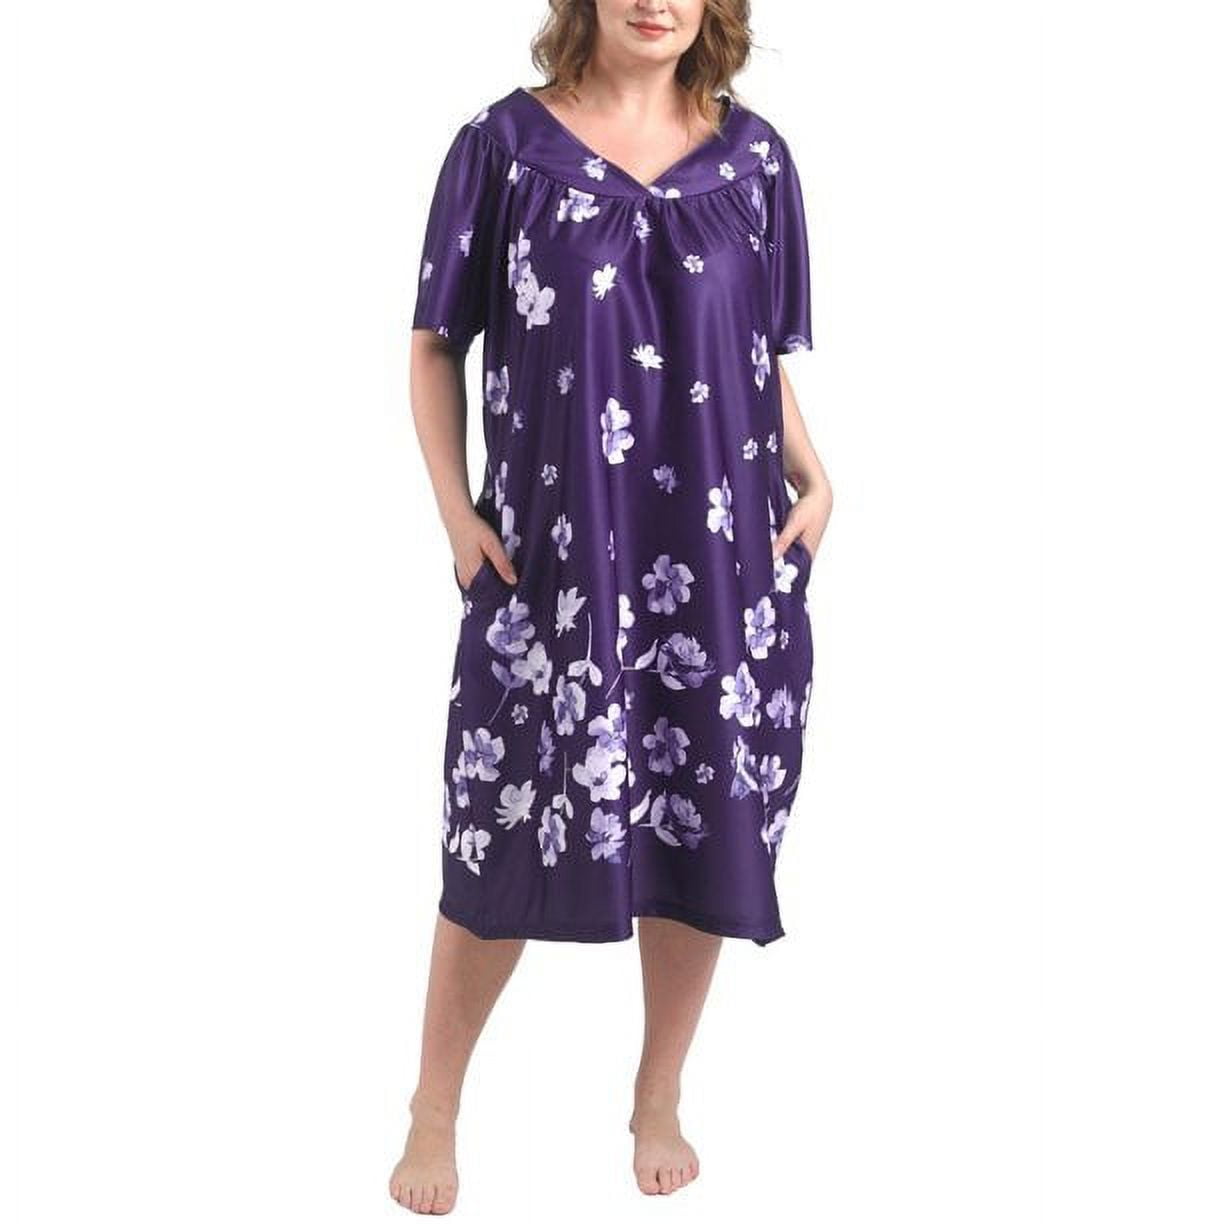 FEREMO 100% Cotton Nightgowns for Women Plus Size Nightgowns Soft